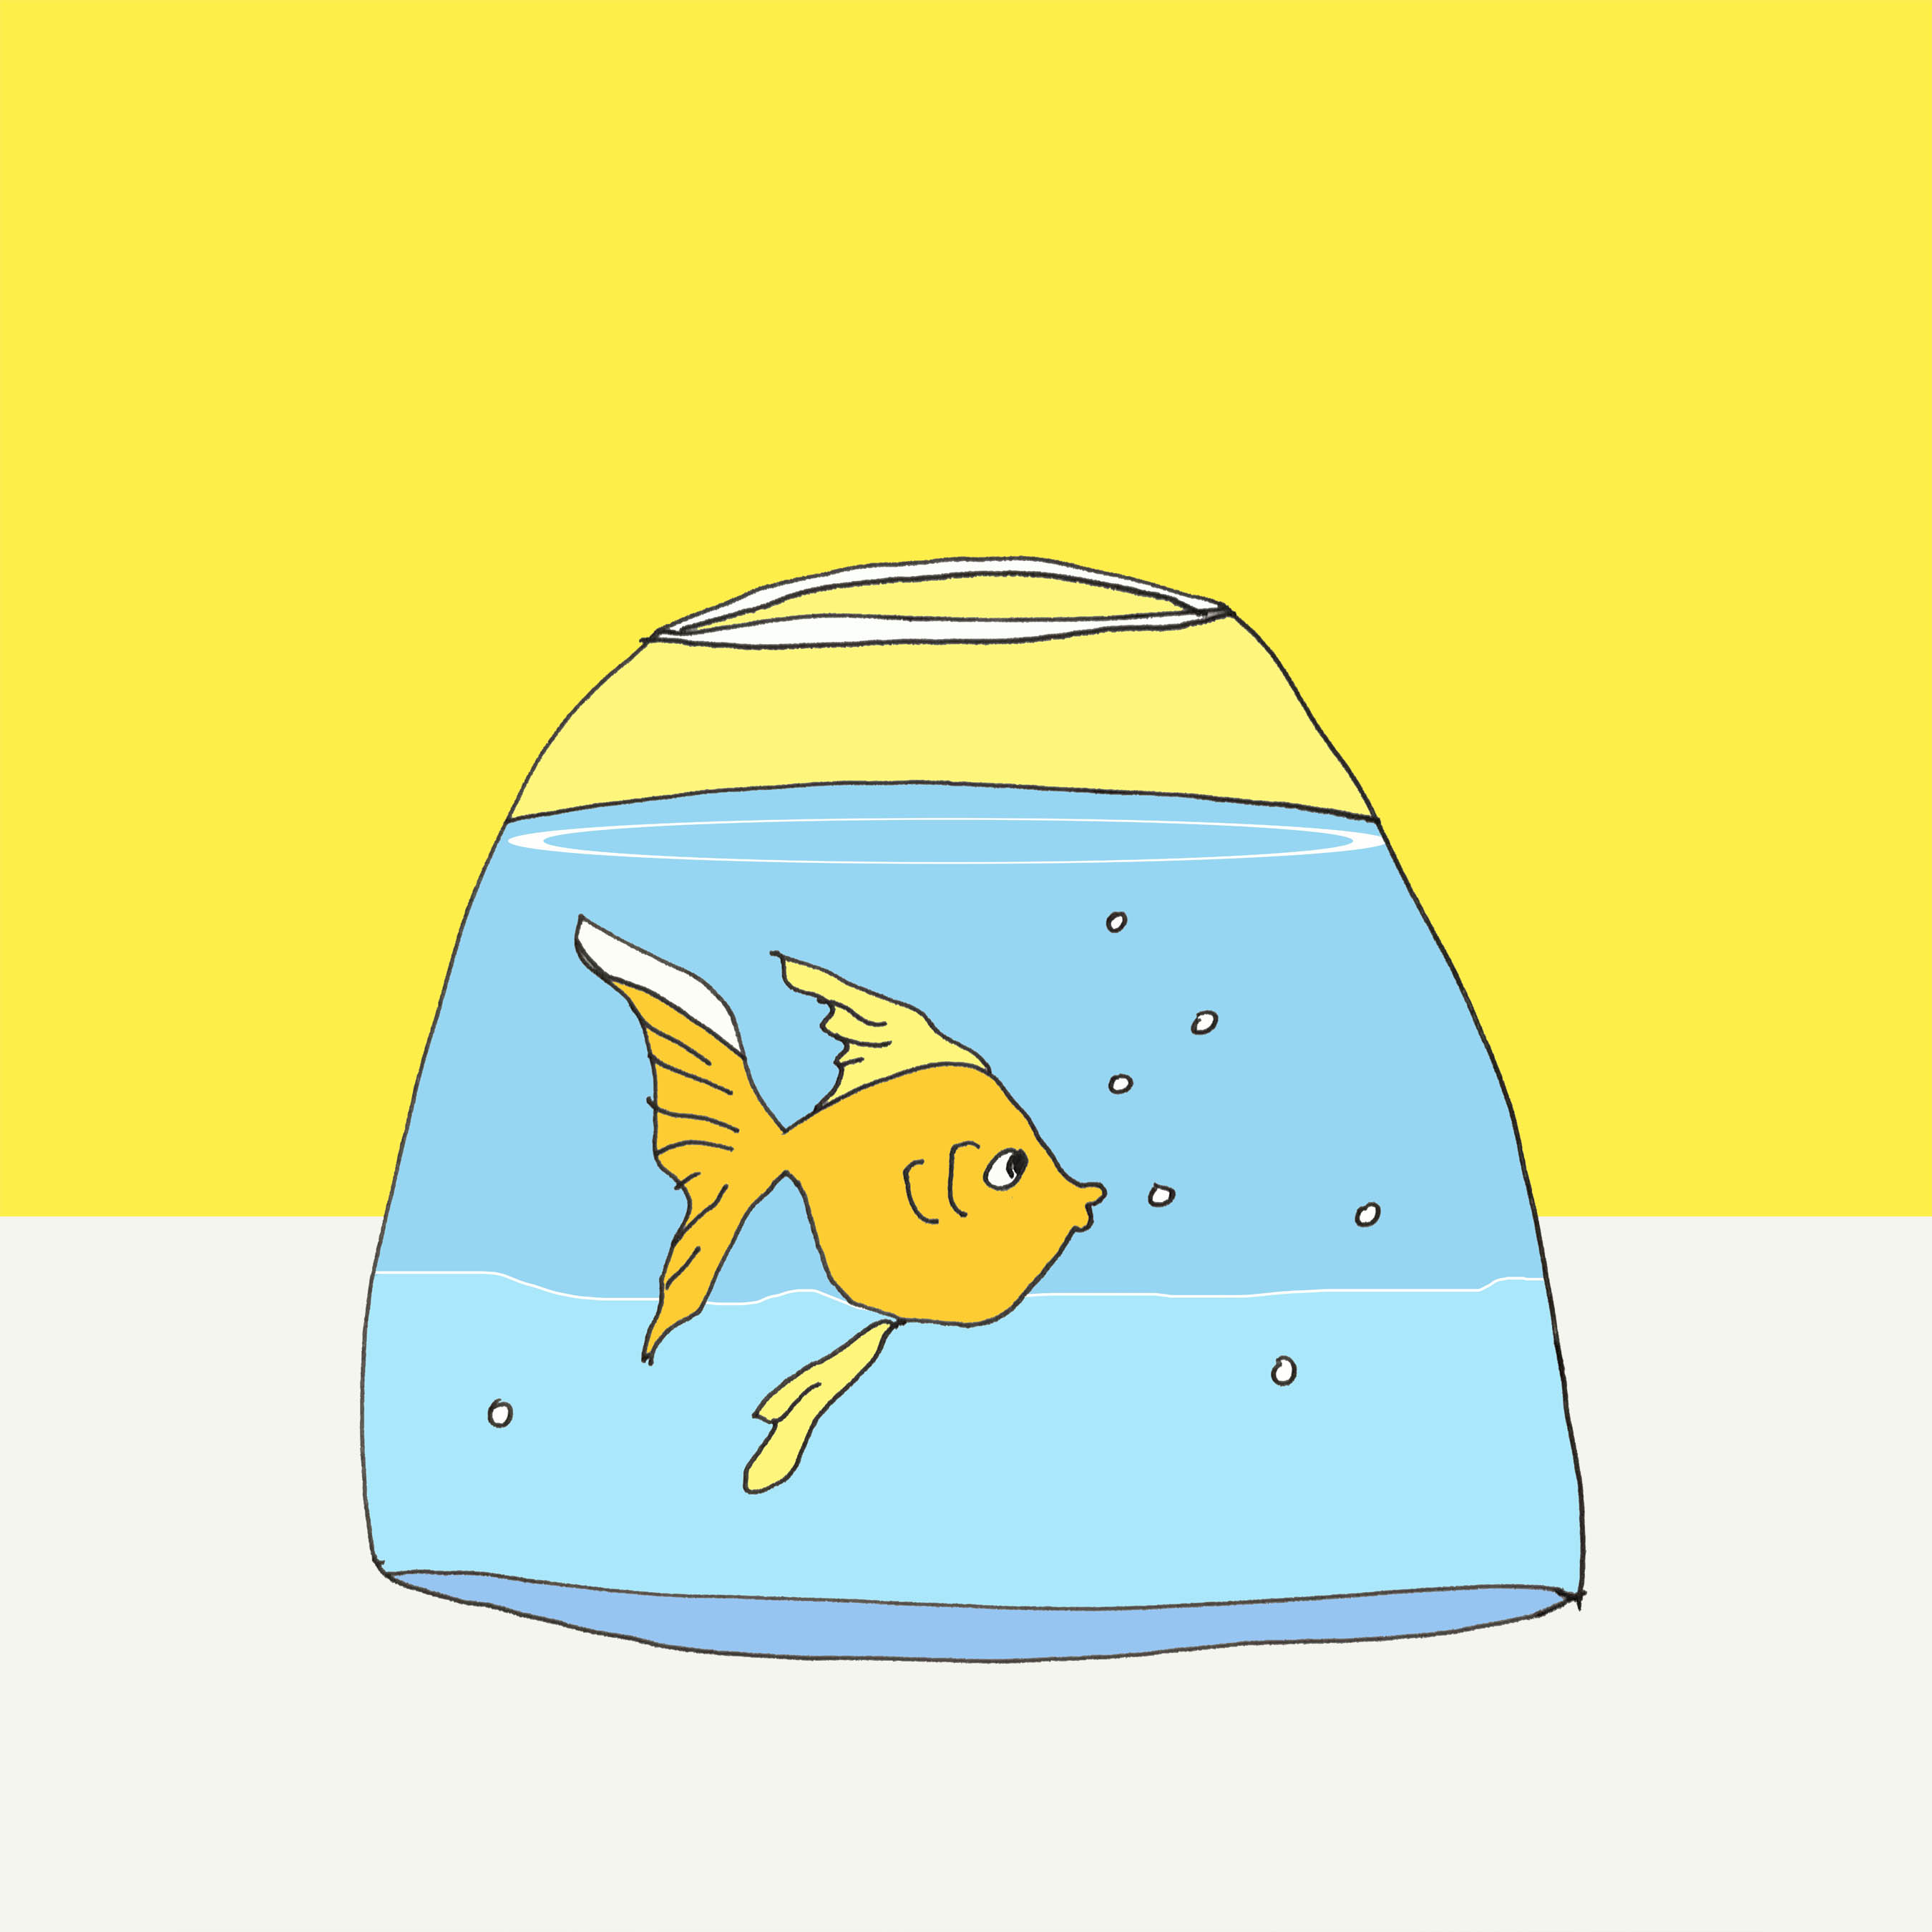 art every day number 215 / illustration / fishbowl